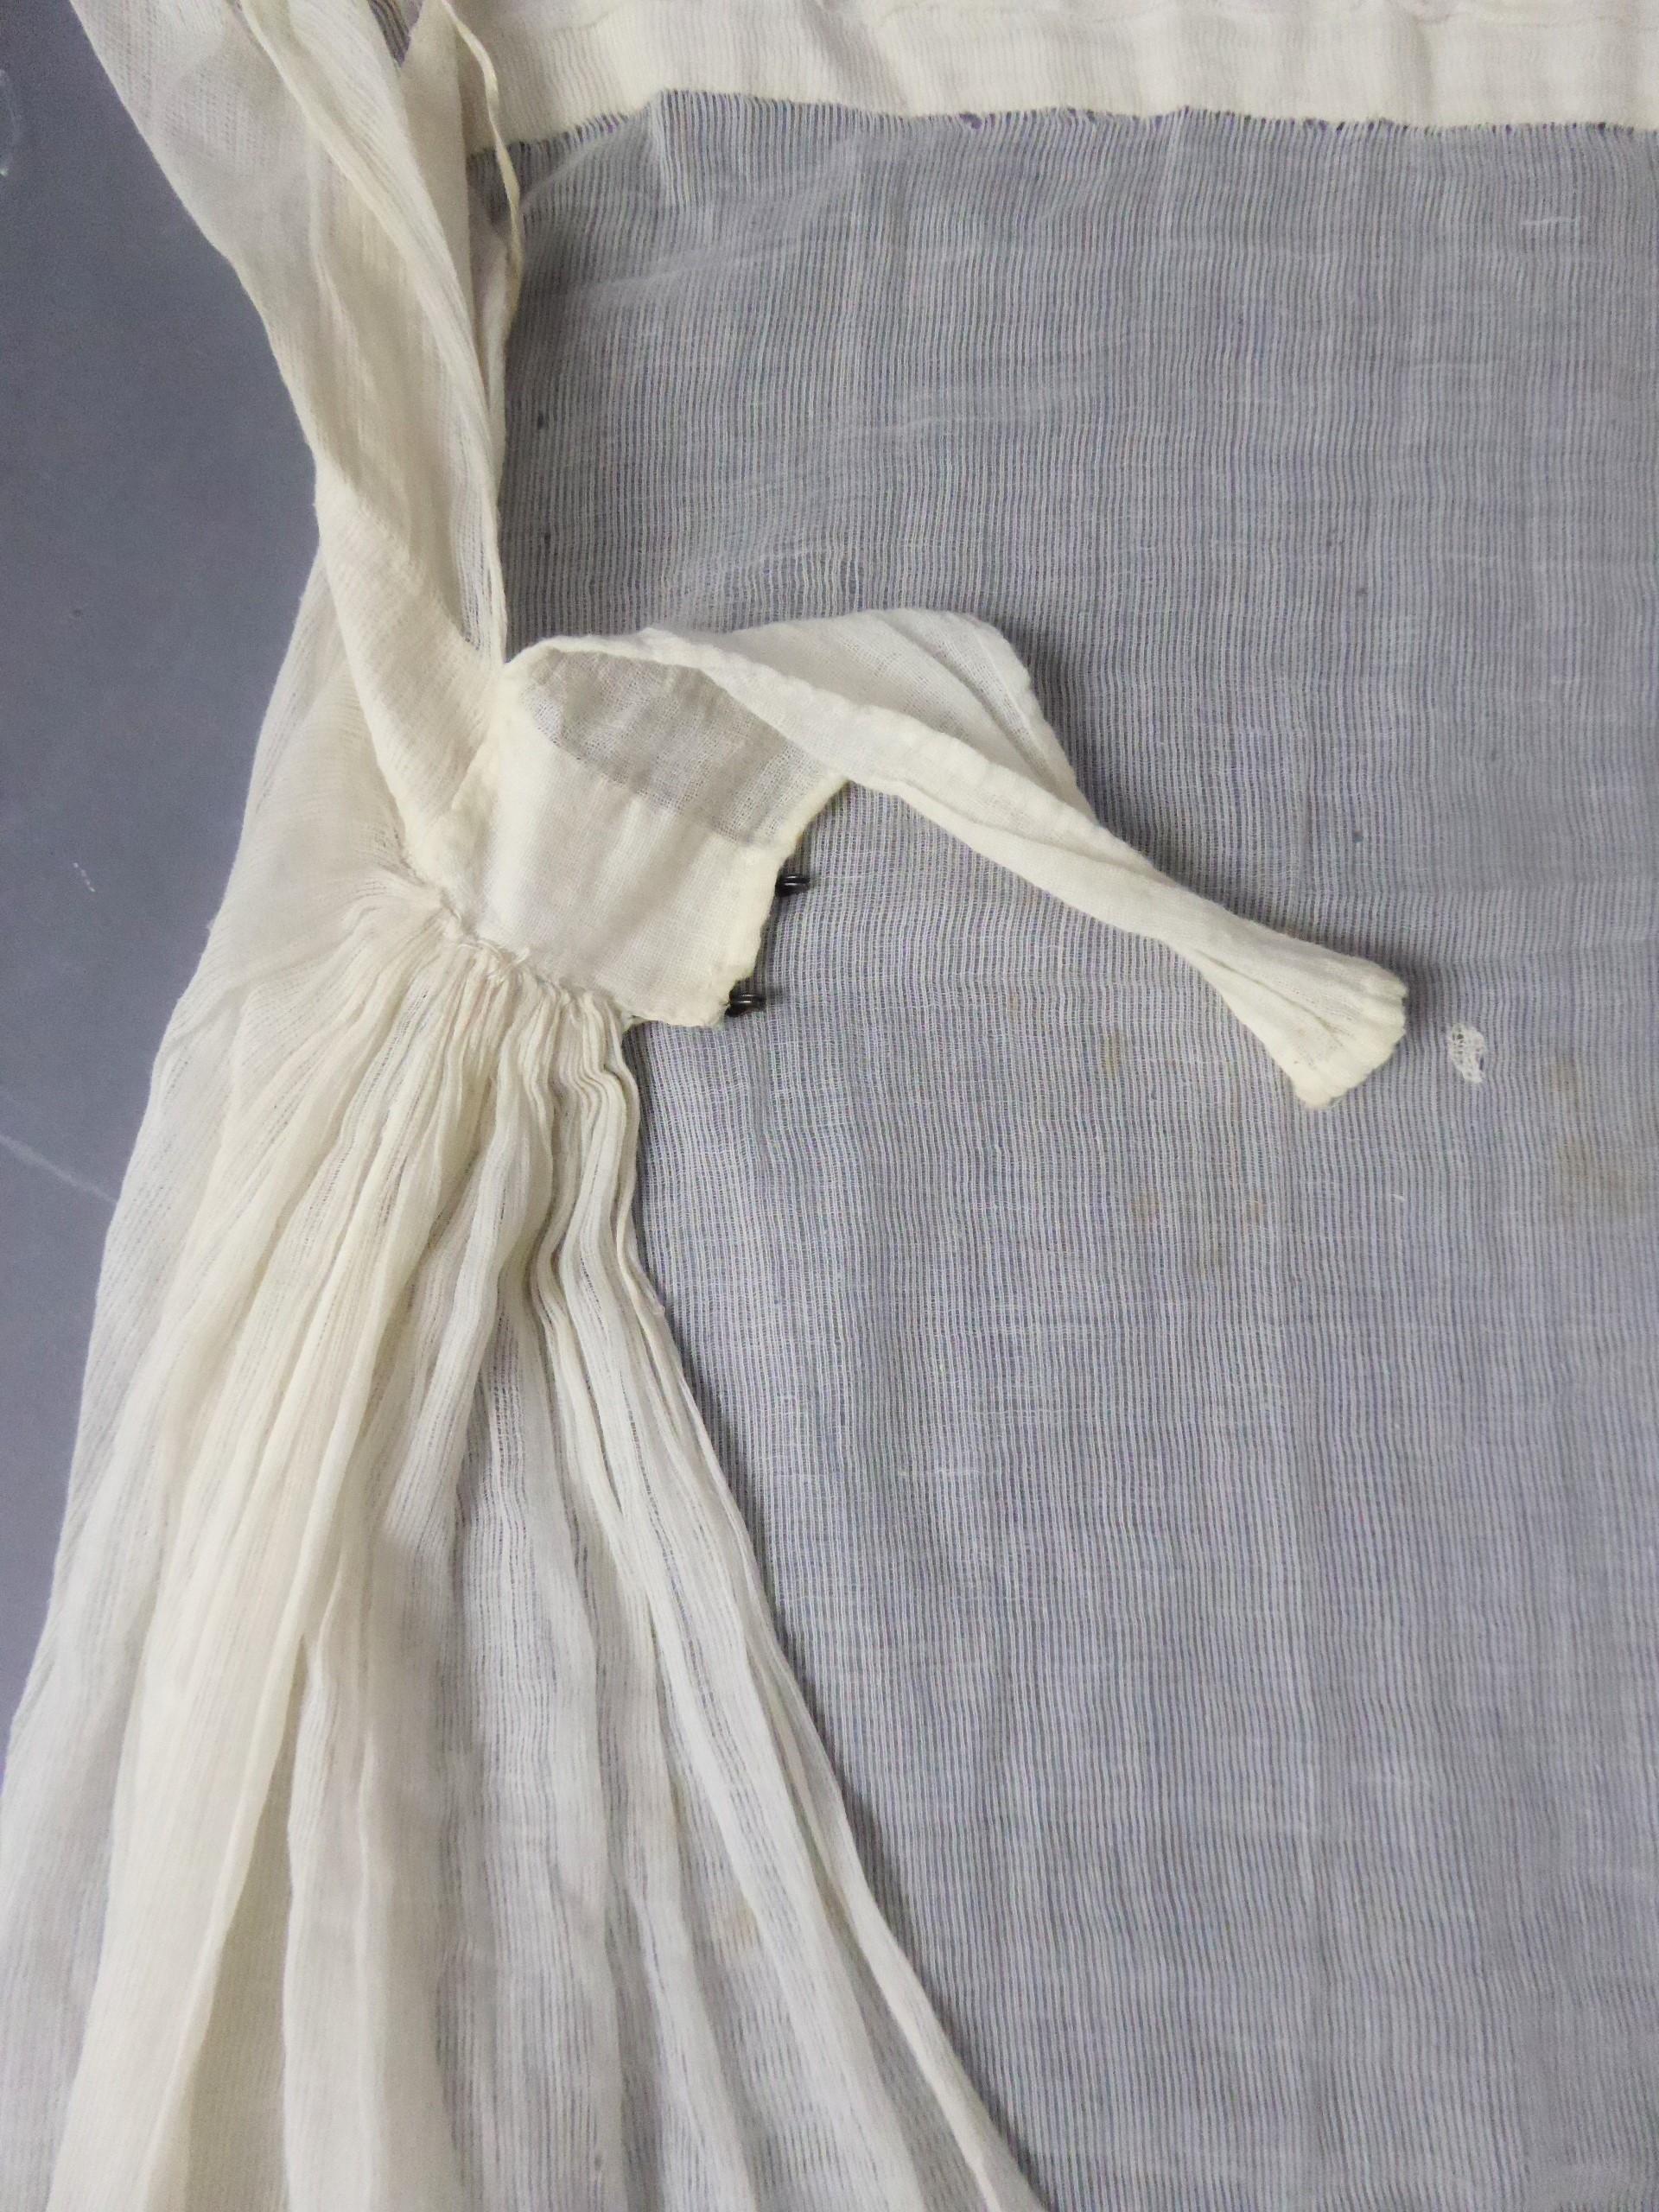 A Regency Cotton Voile Day Embroidered Summer Dress -France Circa 1815/1820 In Good Condition For Sale In Toulon, FR